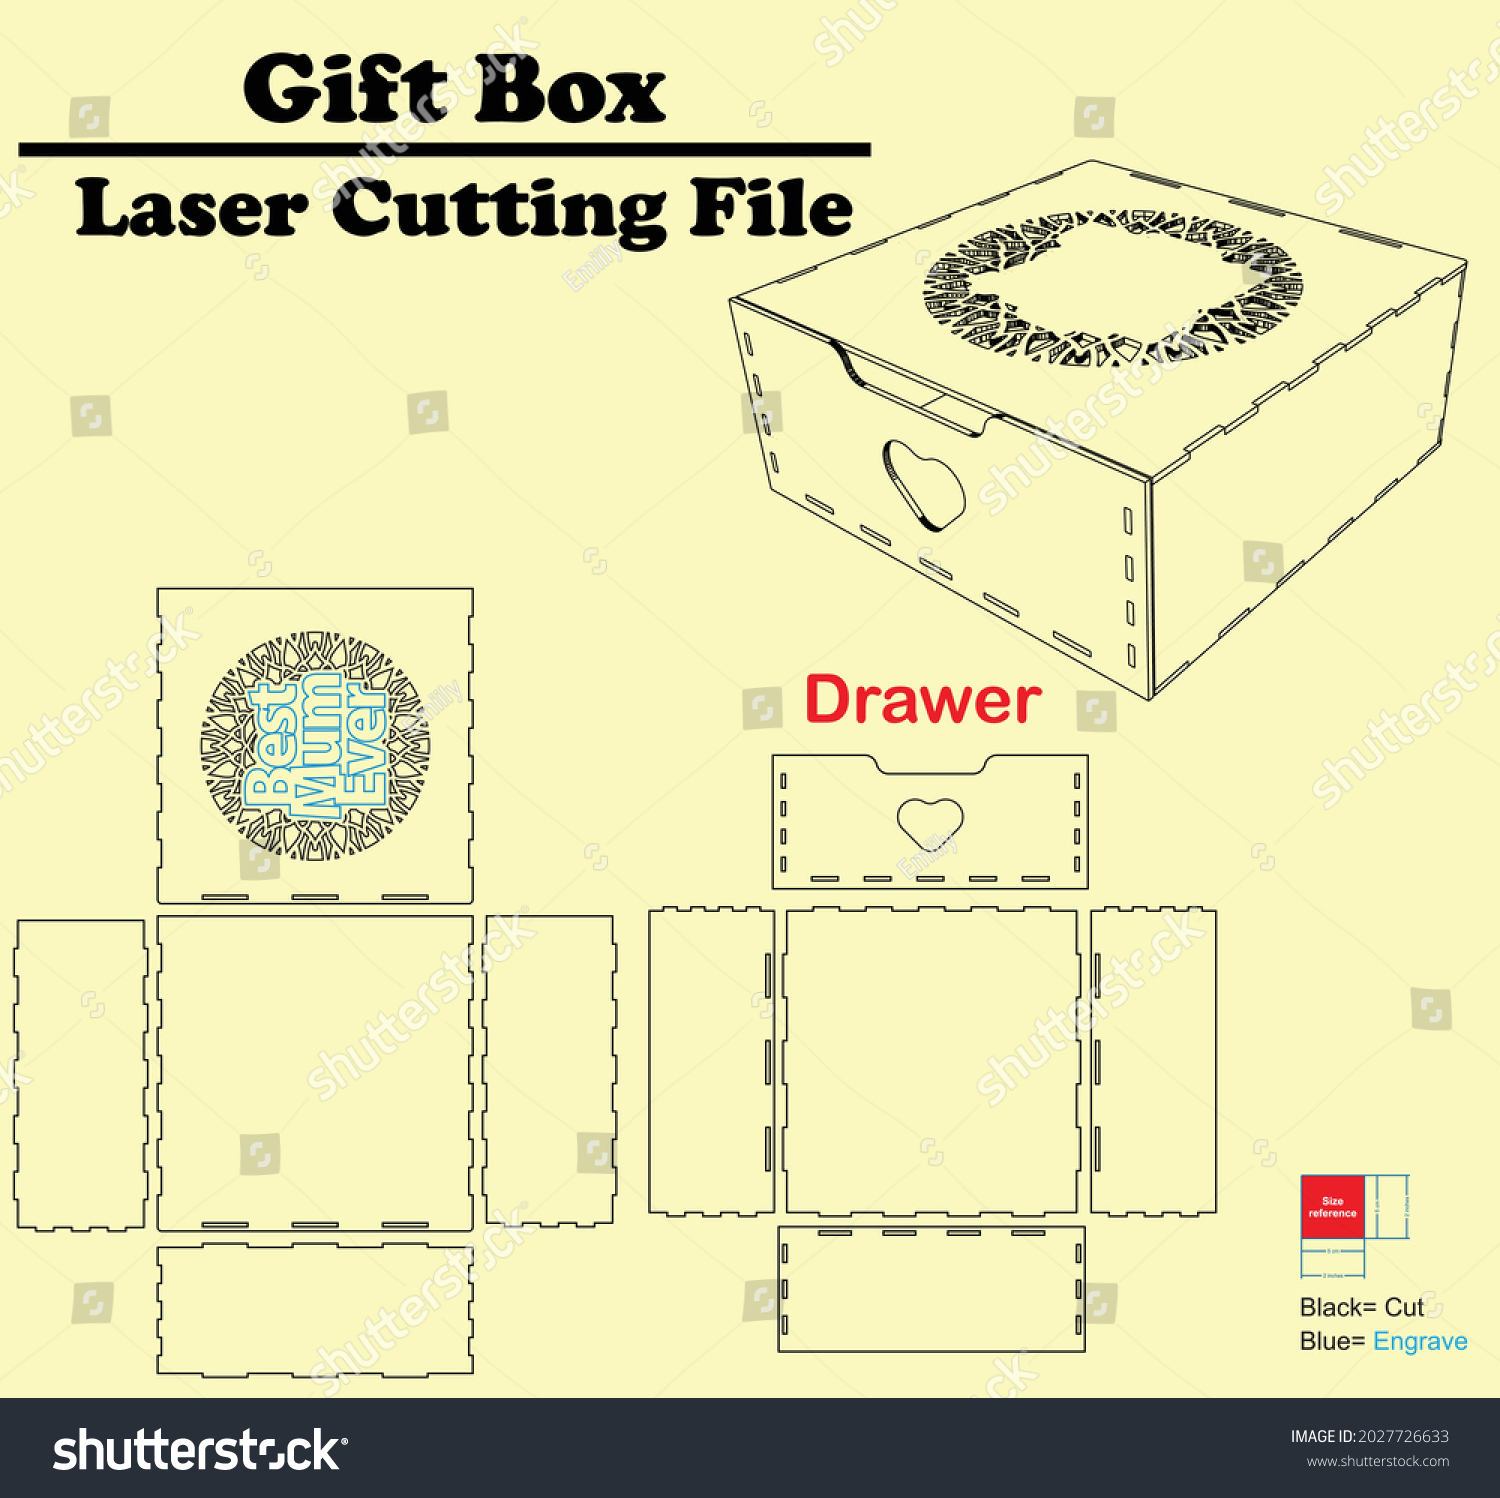 SVG of Gift boxes have the potential to make gift-giving magical. Filled with a collection of themed items, the perfect gift box can deliver more joy than the sum of each component.
available=3mm thickness svg